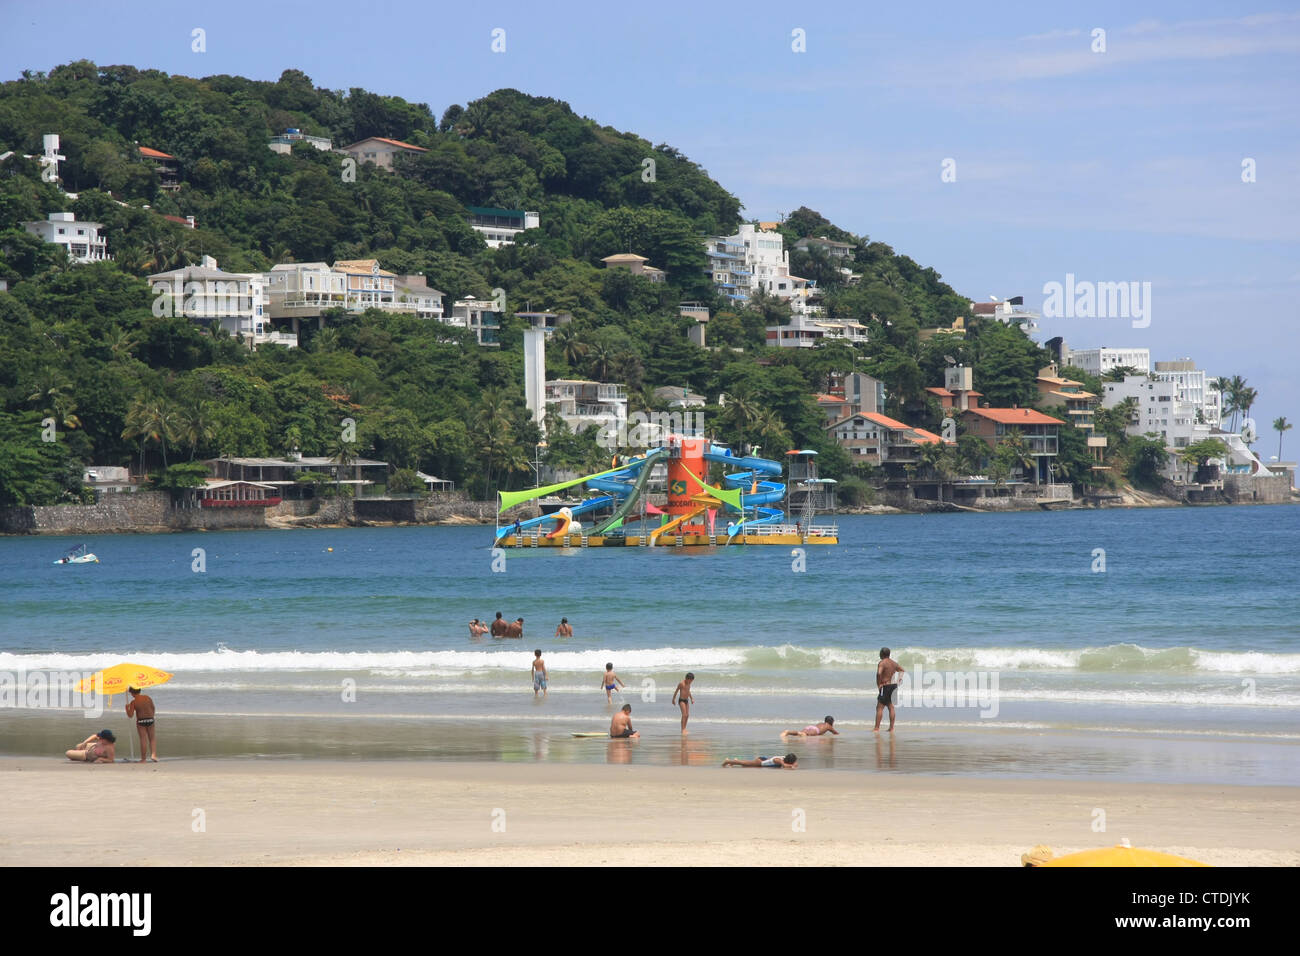 Beach and floating water park rides at Guaruja, Sao Paulo, Brazil Stock Photo